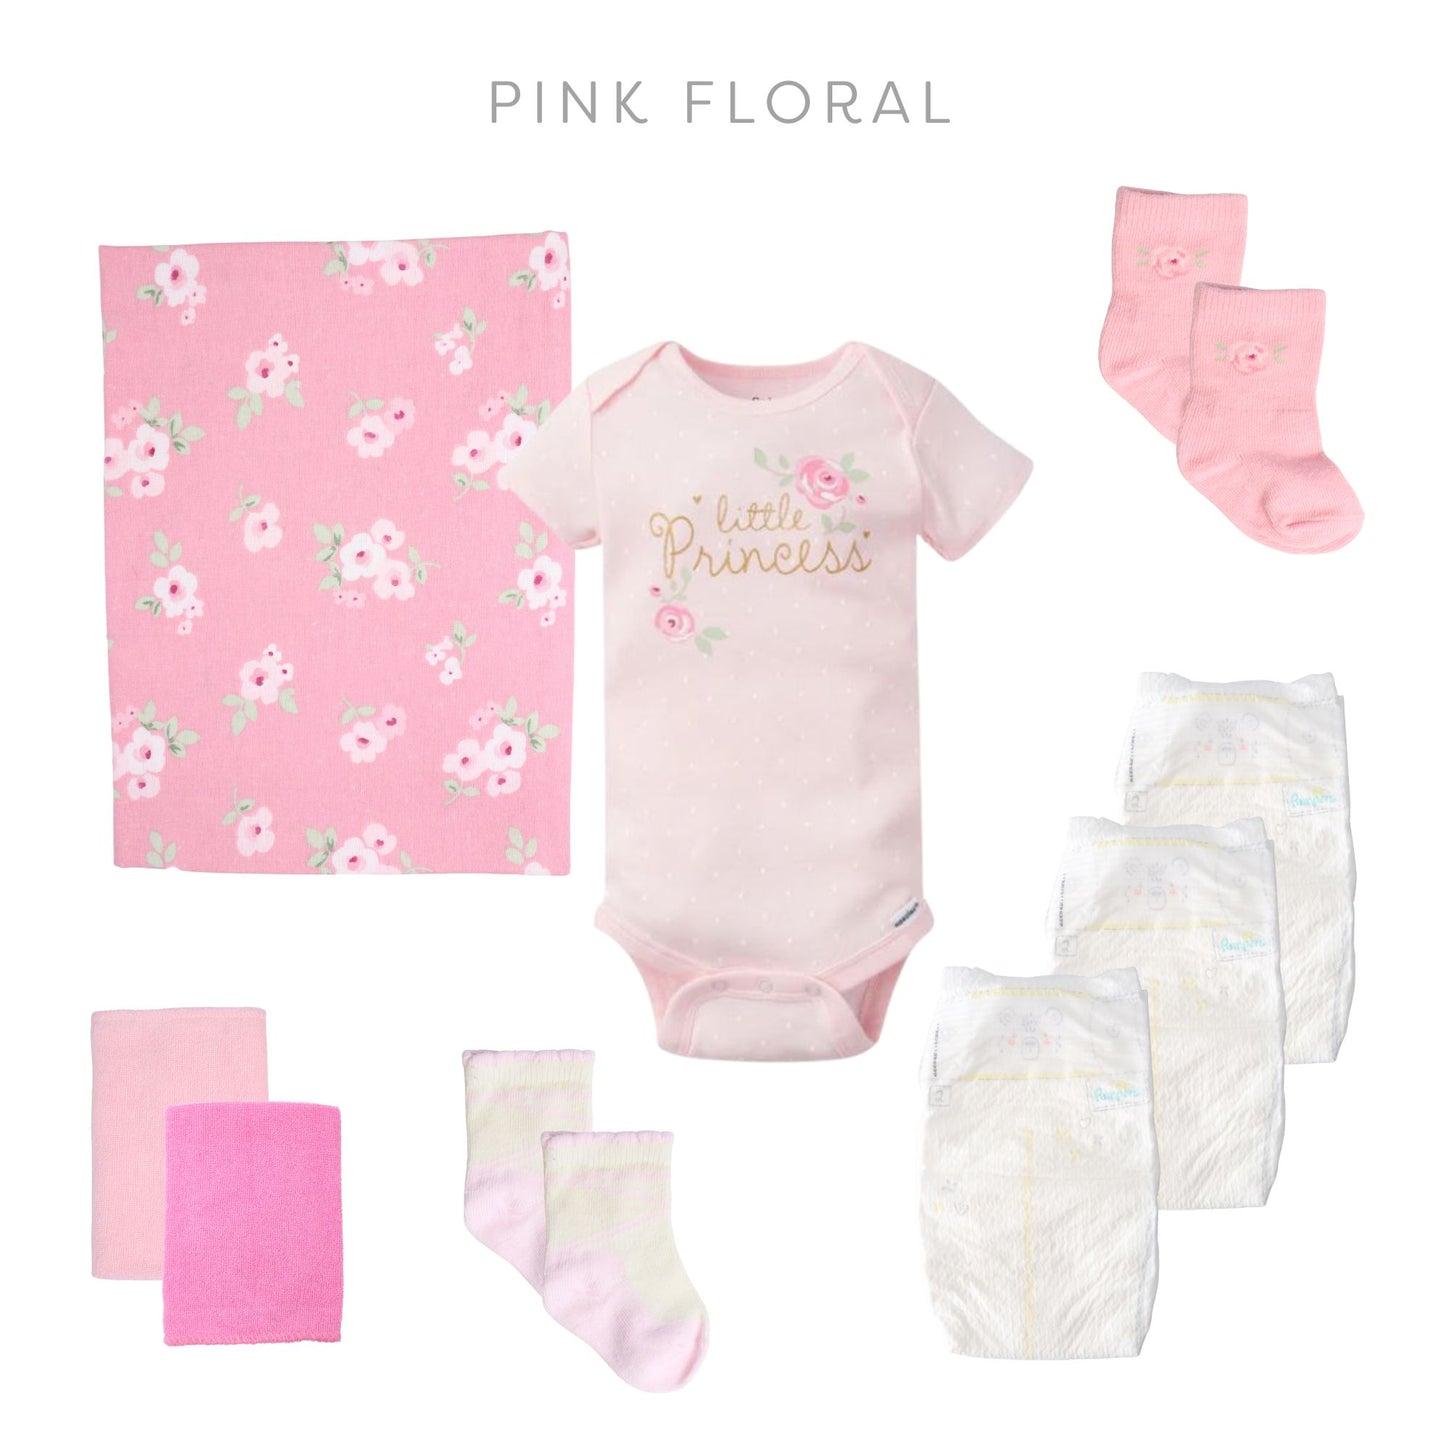 pink floral baby girl gift set contents little princess